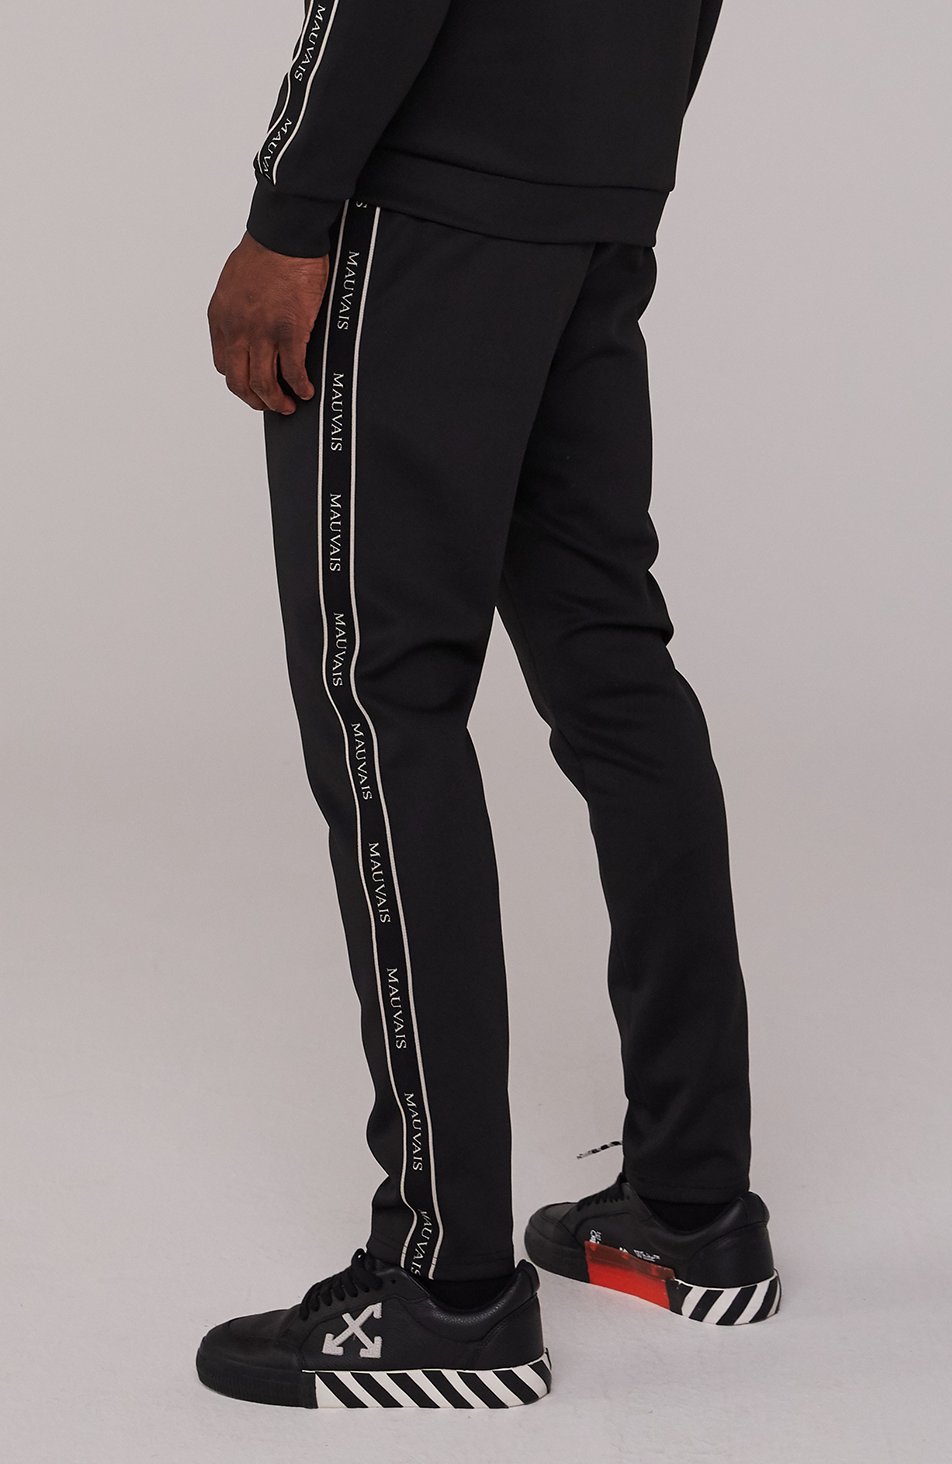 Logo Taped Pants in Black and Gold